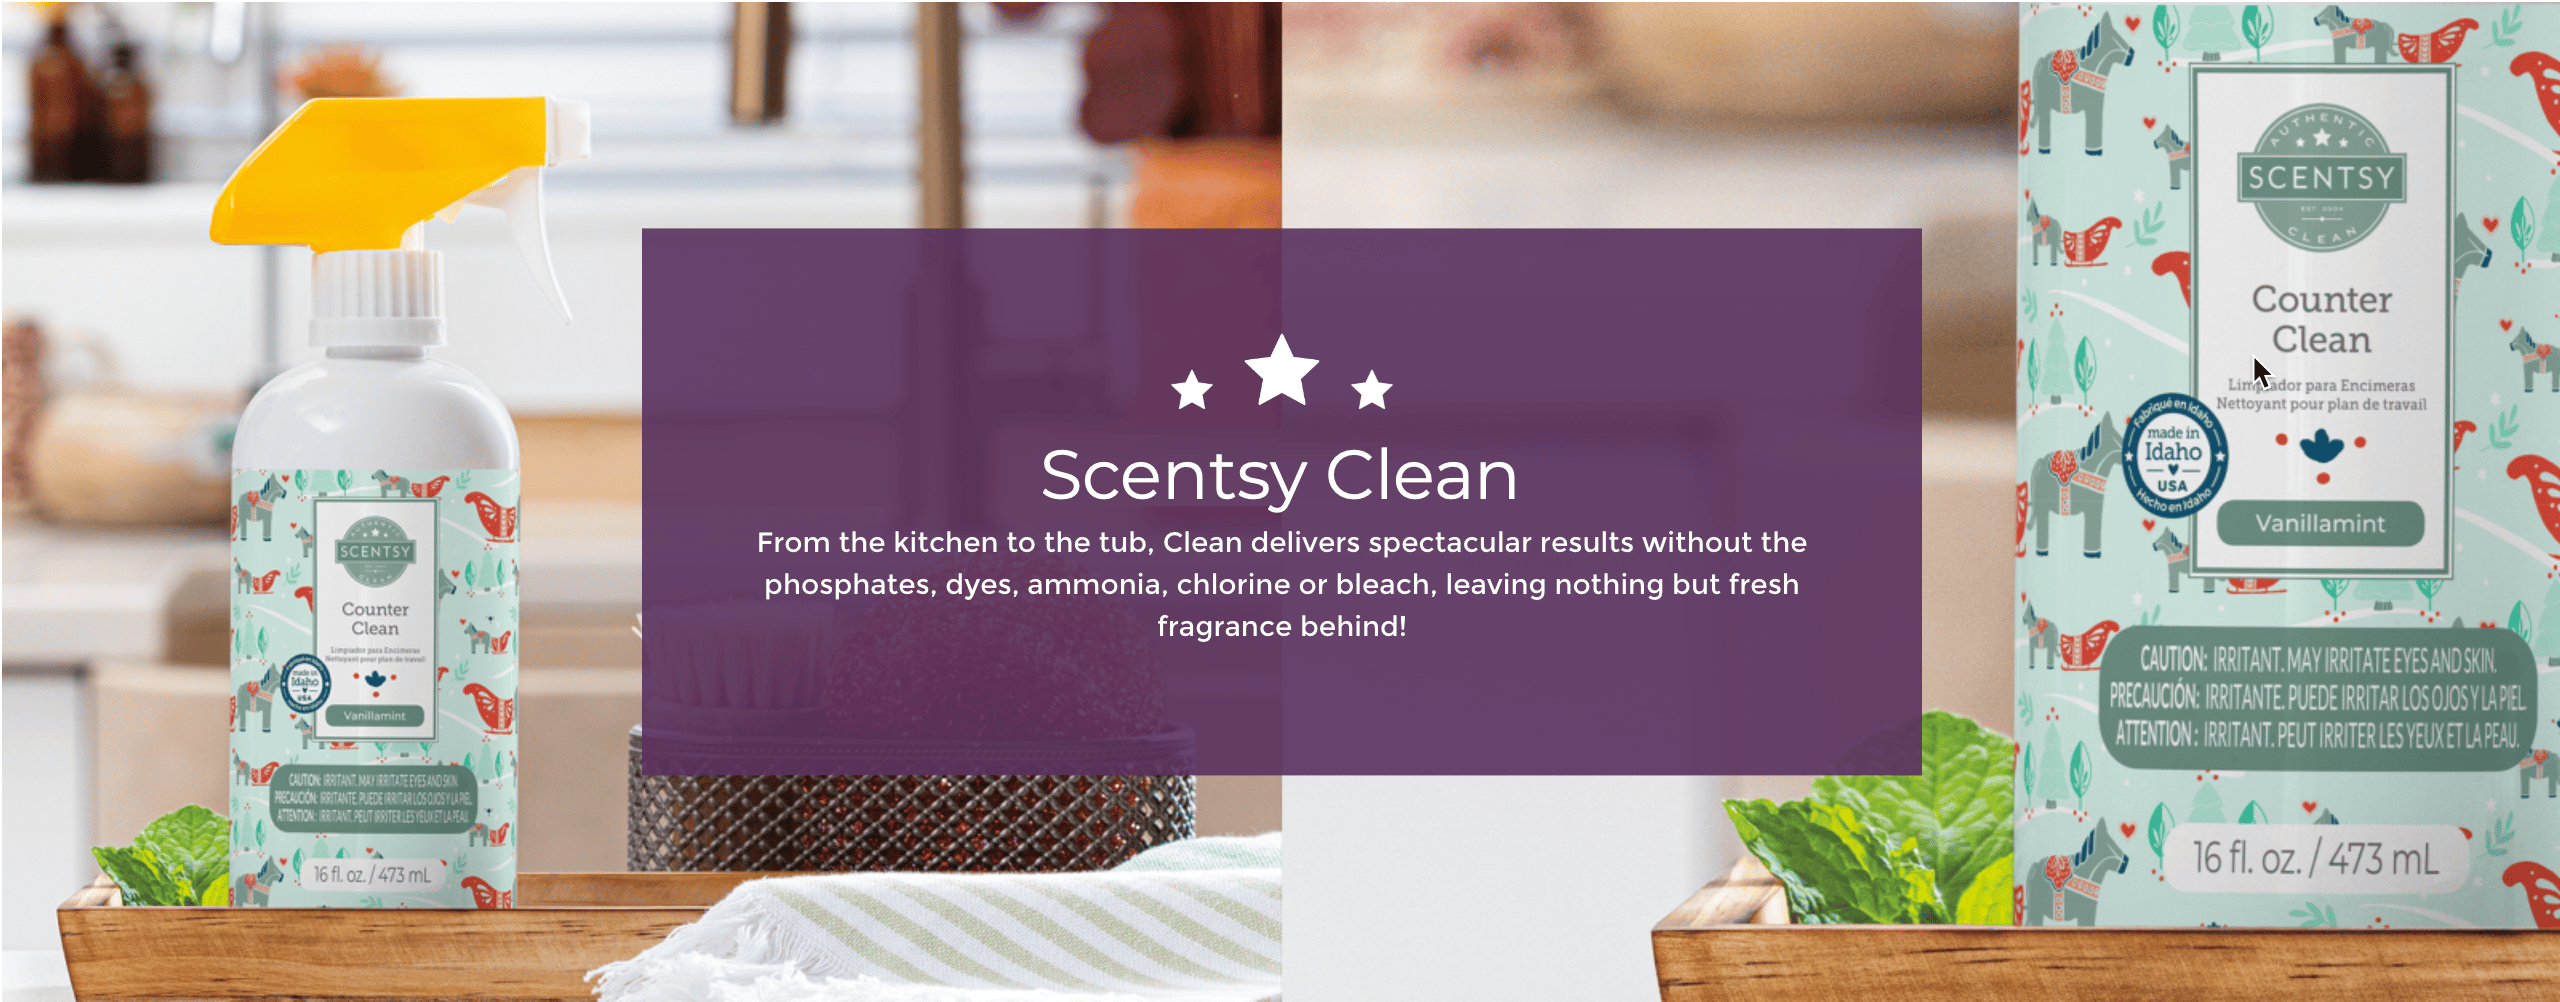 scentsy clean banner